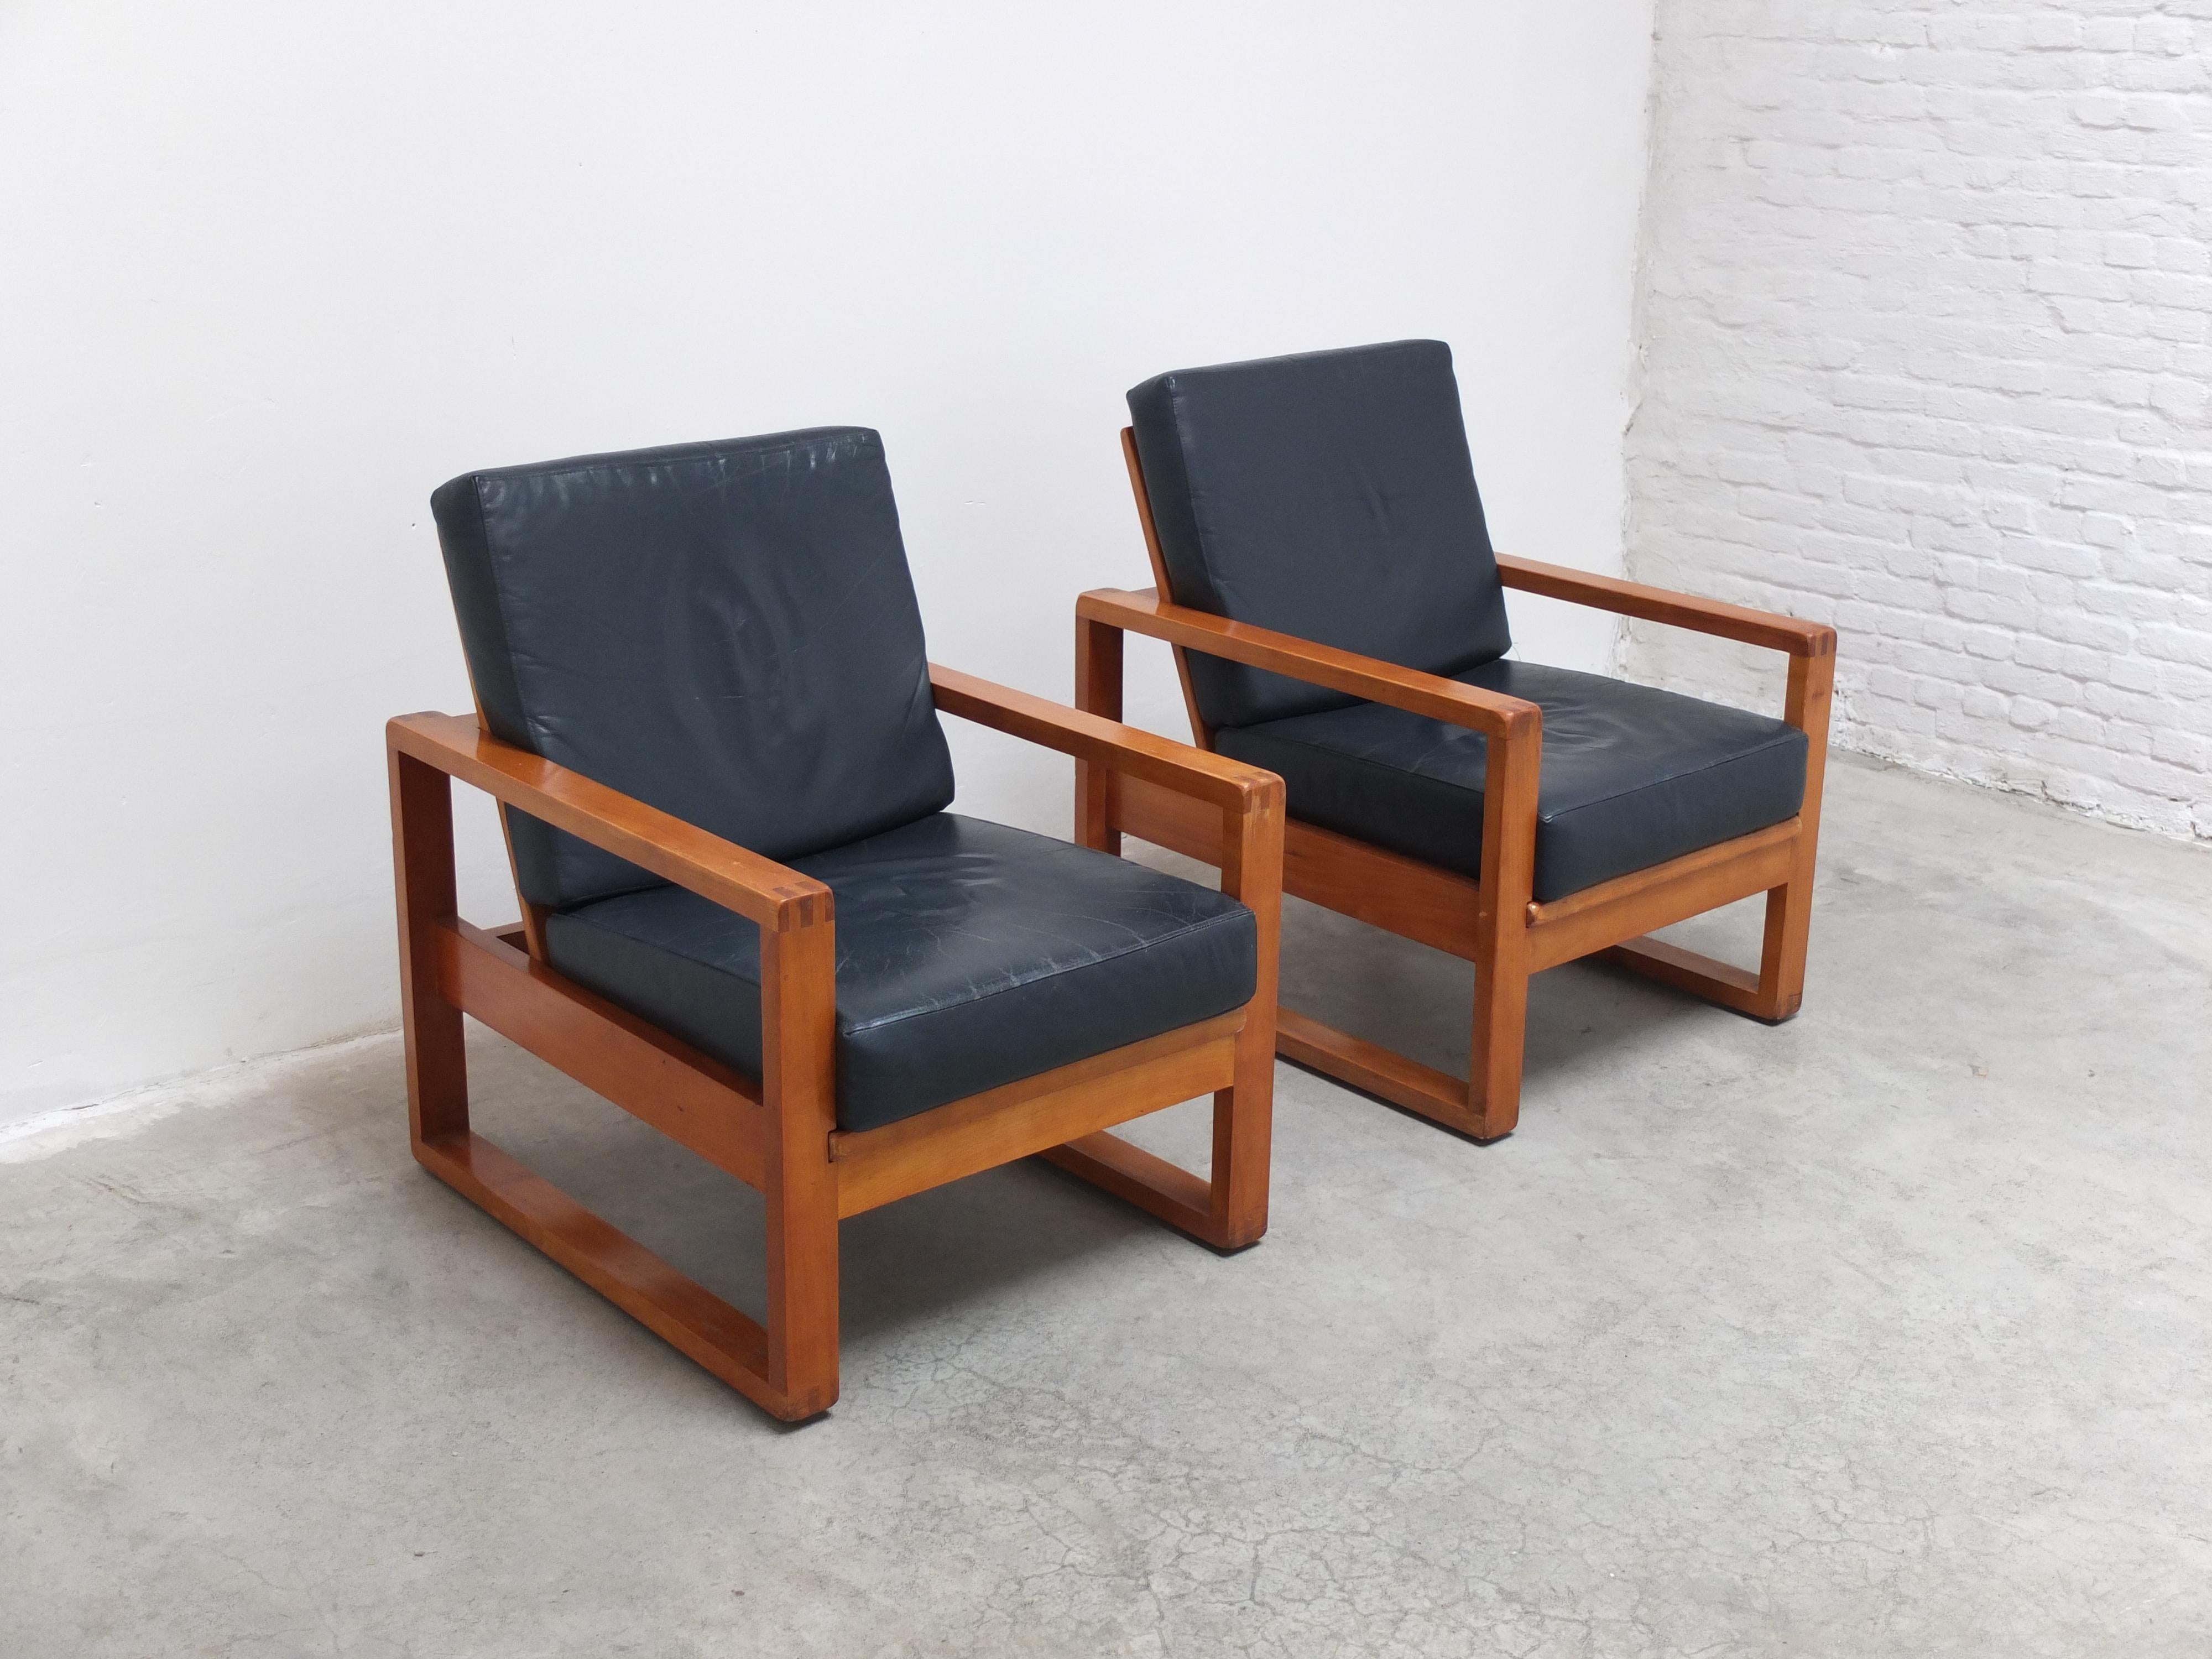 Scandinavian Modern Unique Pair of Modernist Lounge Chairs by Van Den Berghe-Pauvers, 1960s For Sale